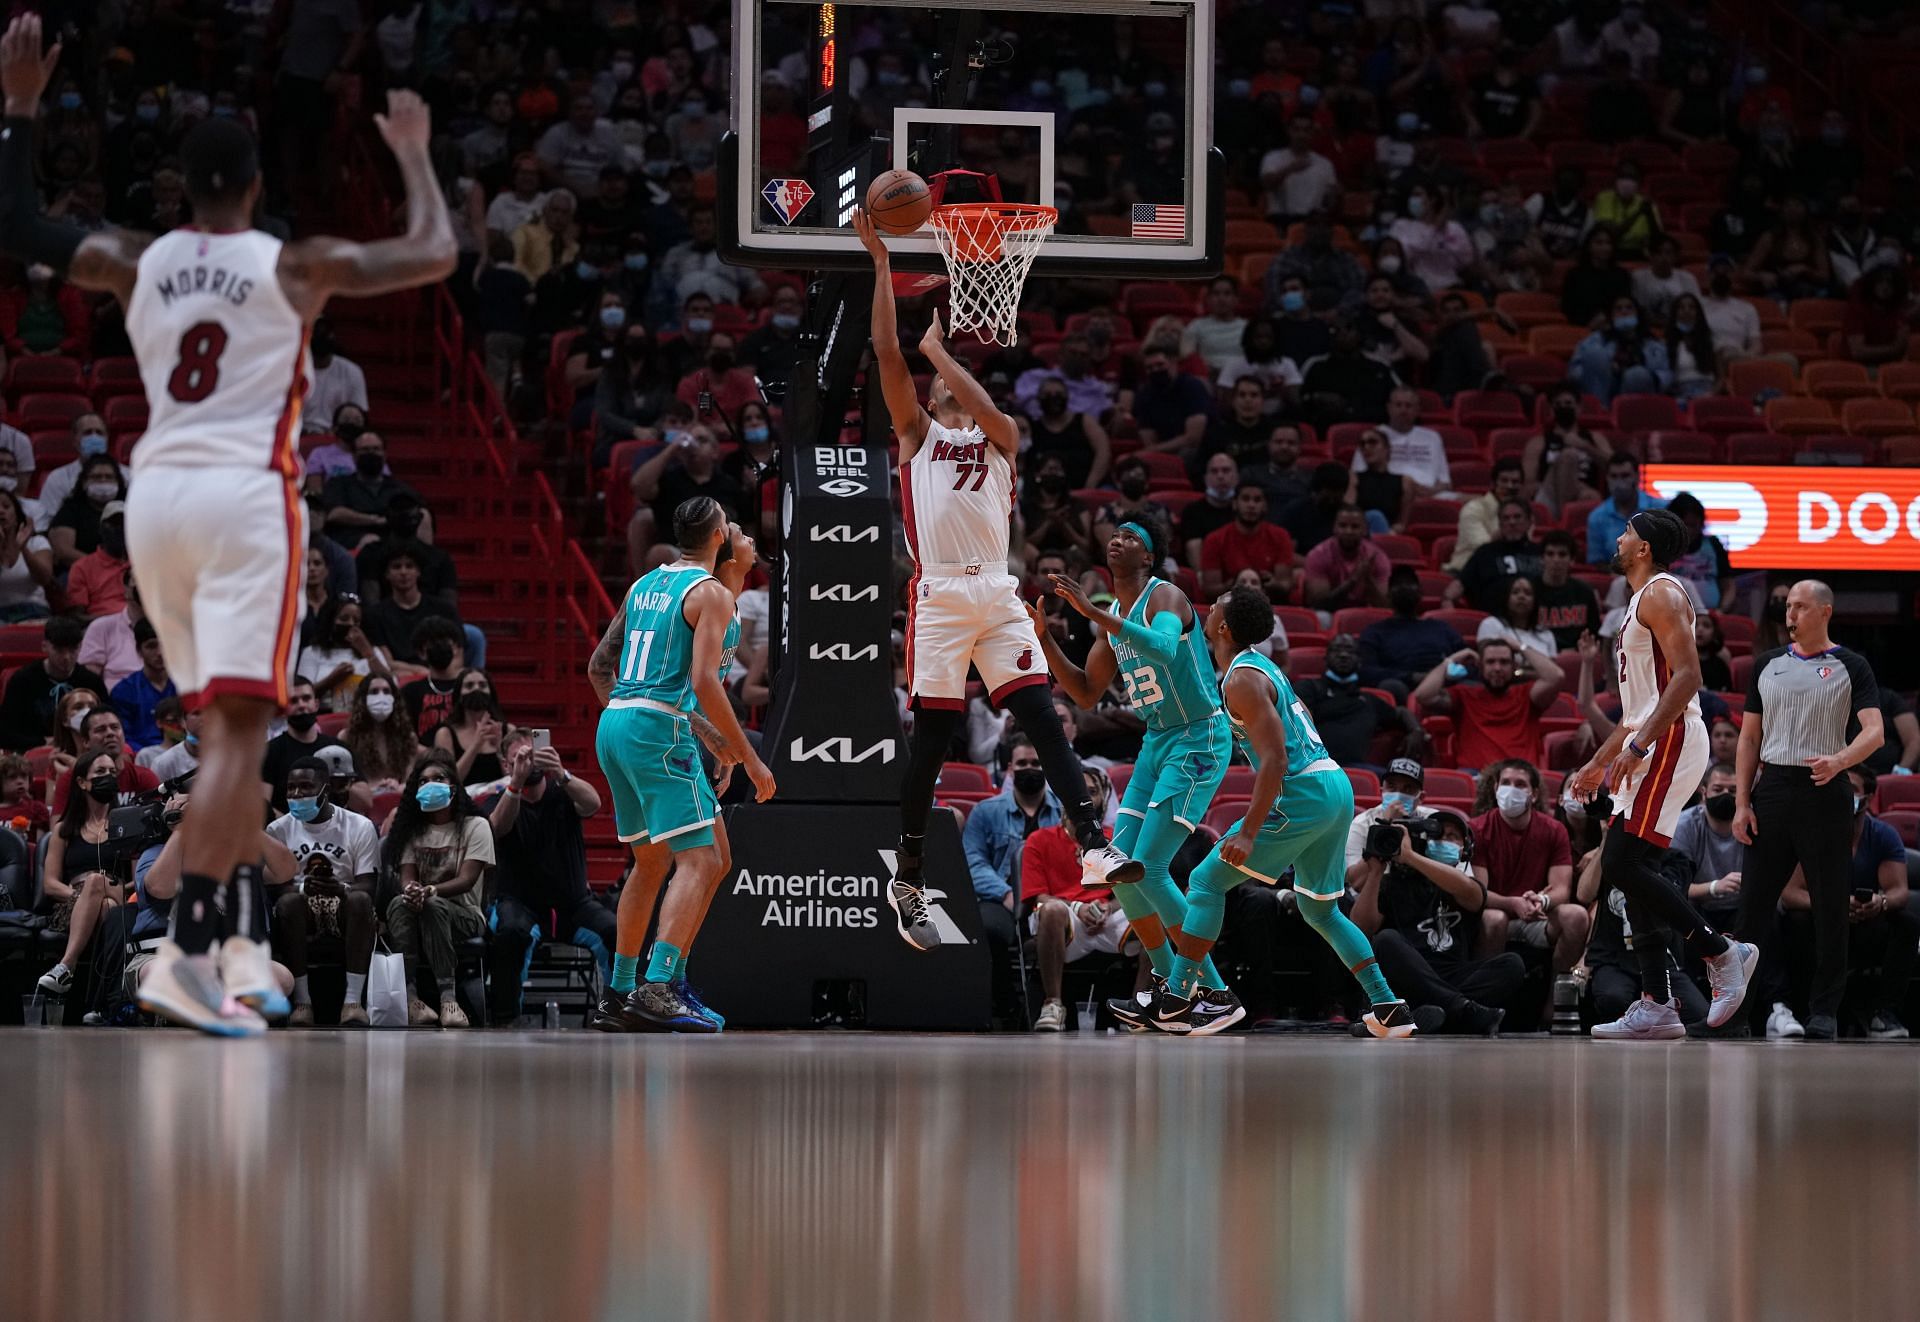 The Miami Heat will host the Charlotte Hornets on October 29th.